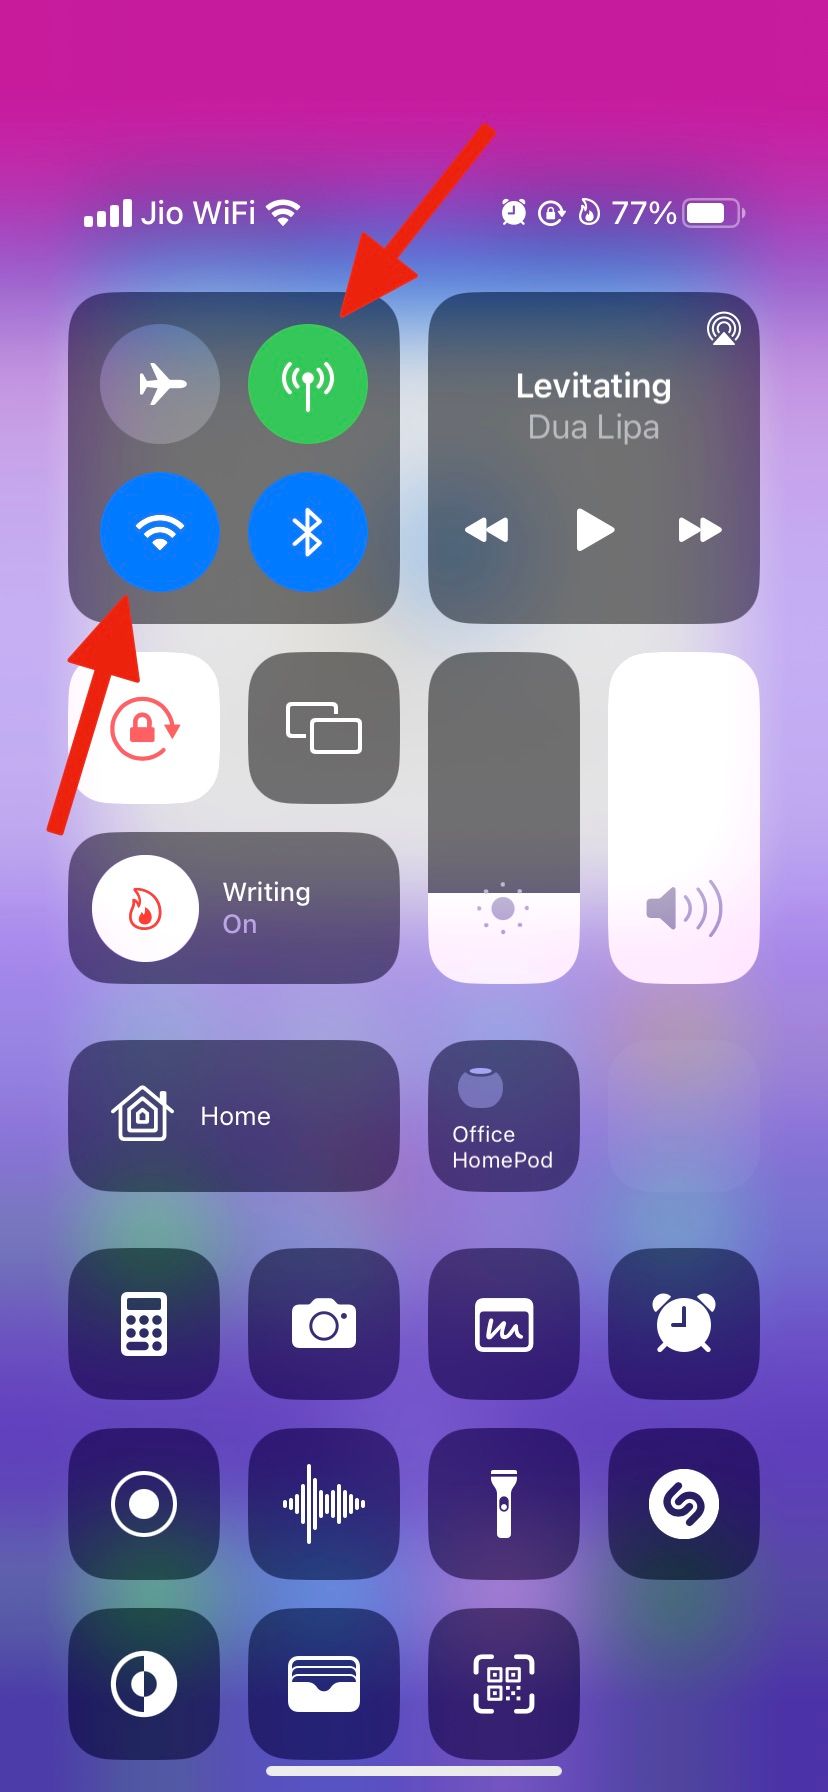 Screenshot highlighting Wi-Fi and mobile data options on iPhone